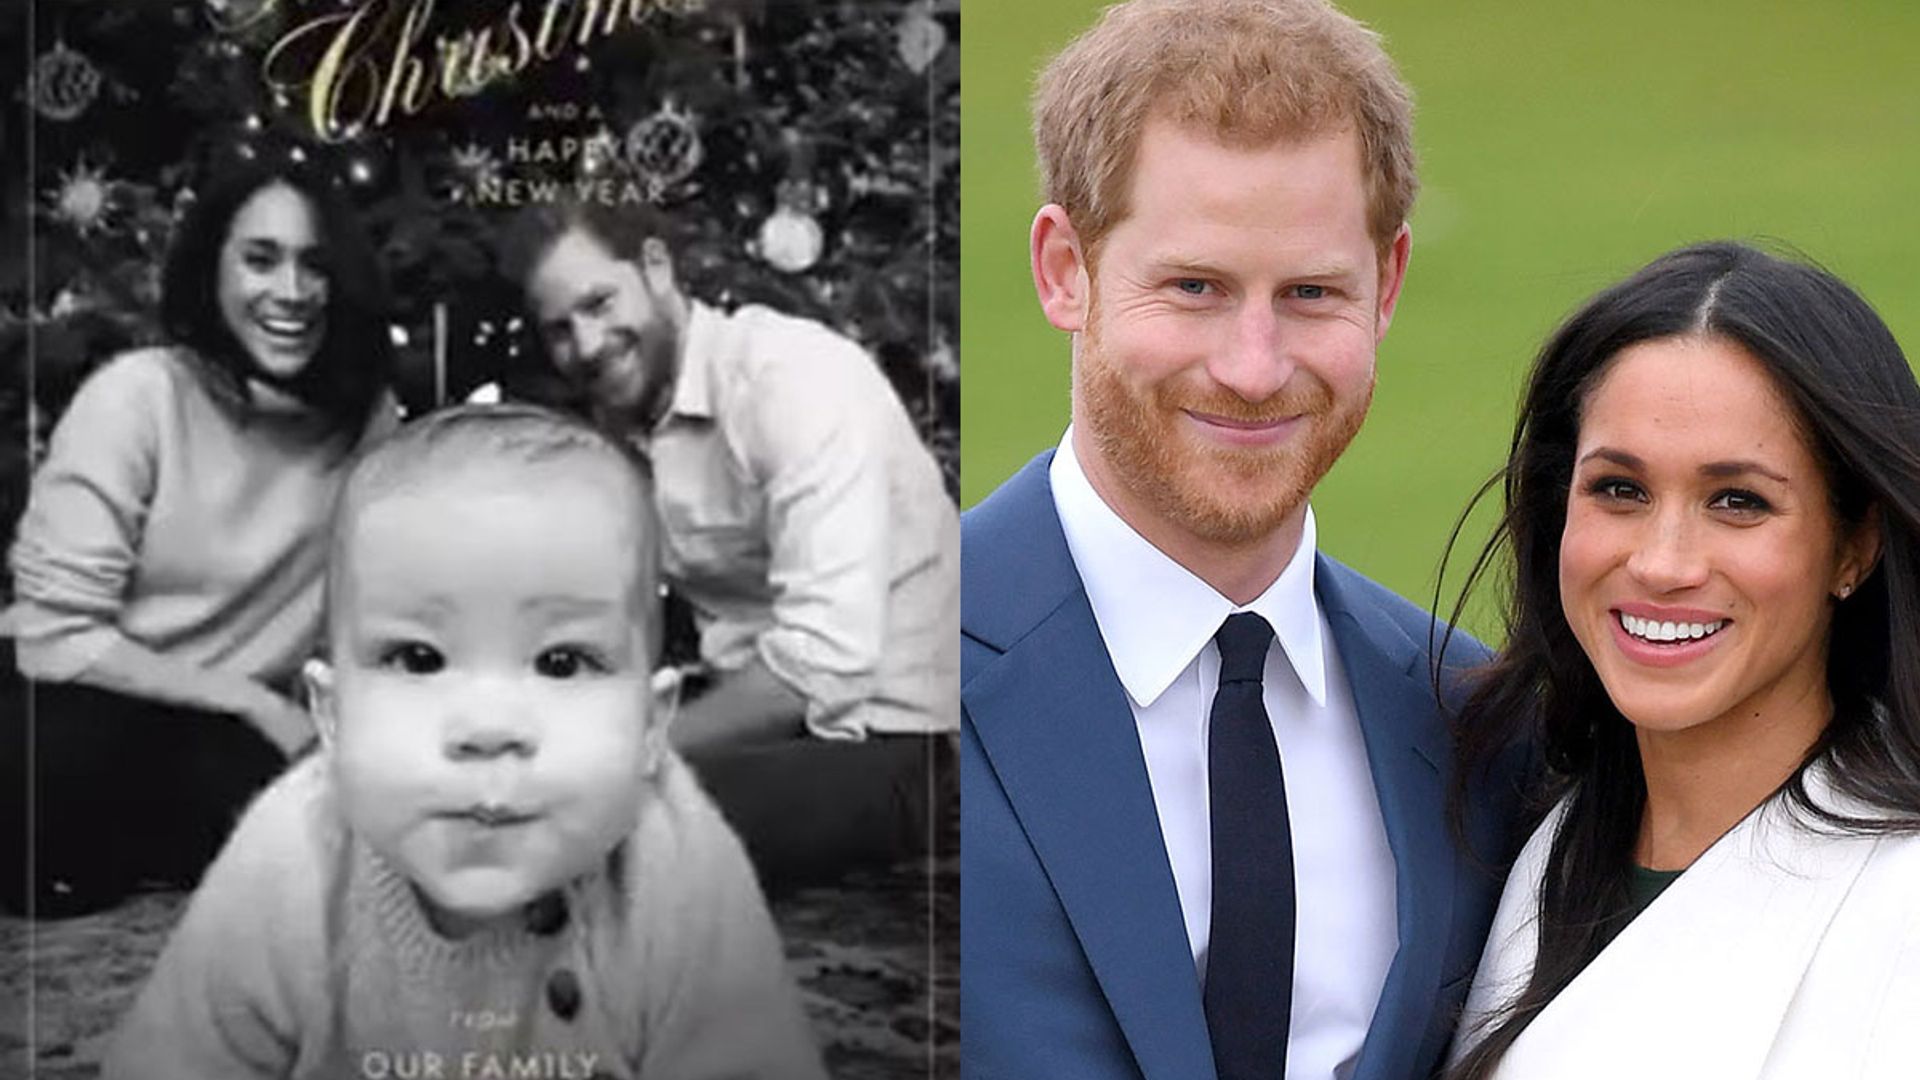 BREAKING: Prince Harry and Meghan Markle release adorable Christmas photo with baby Archie - see ...